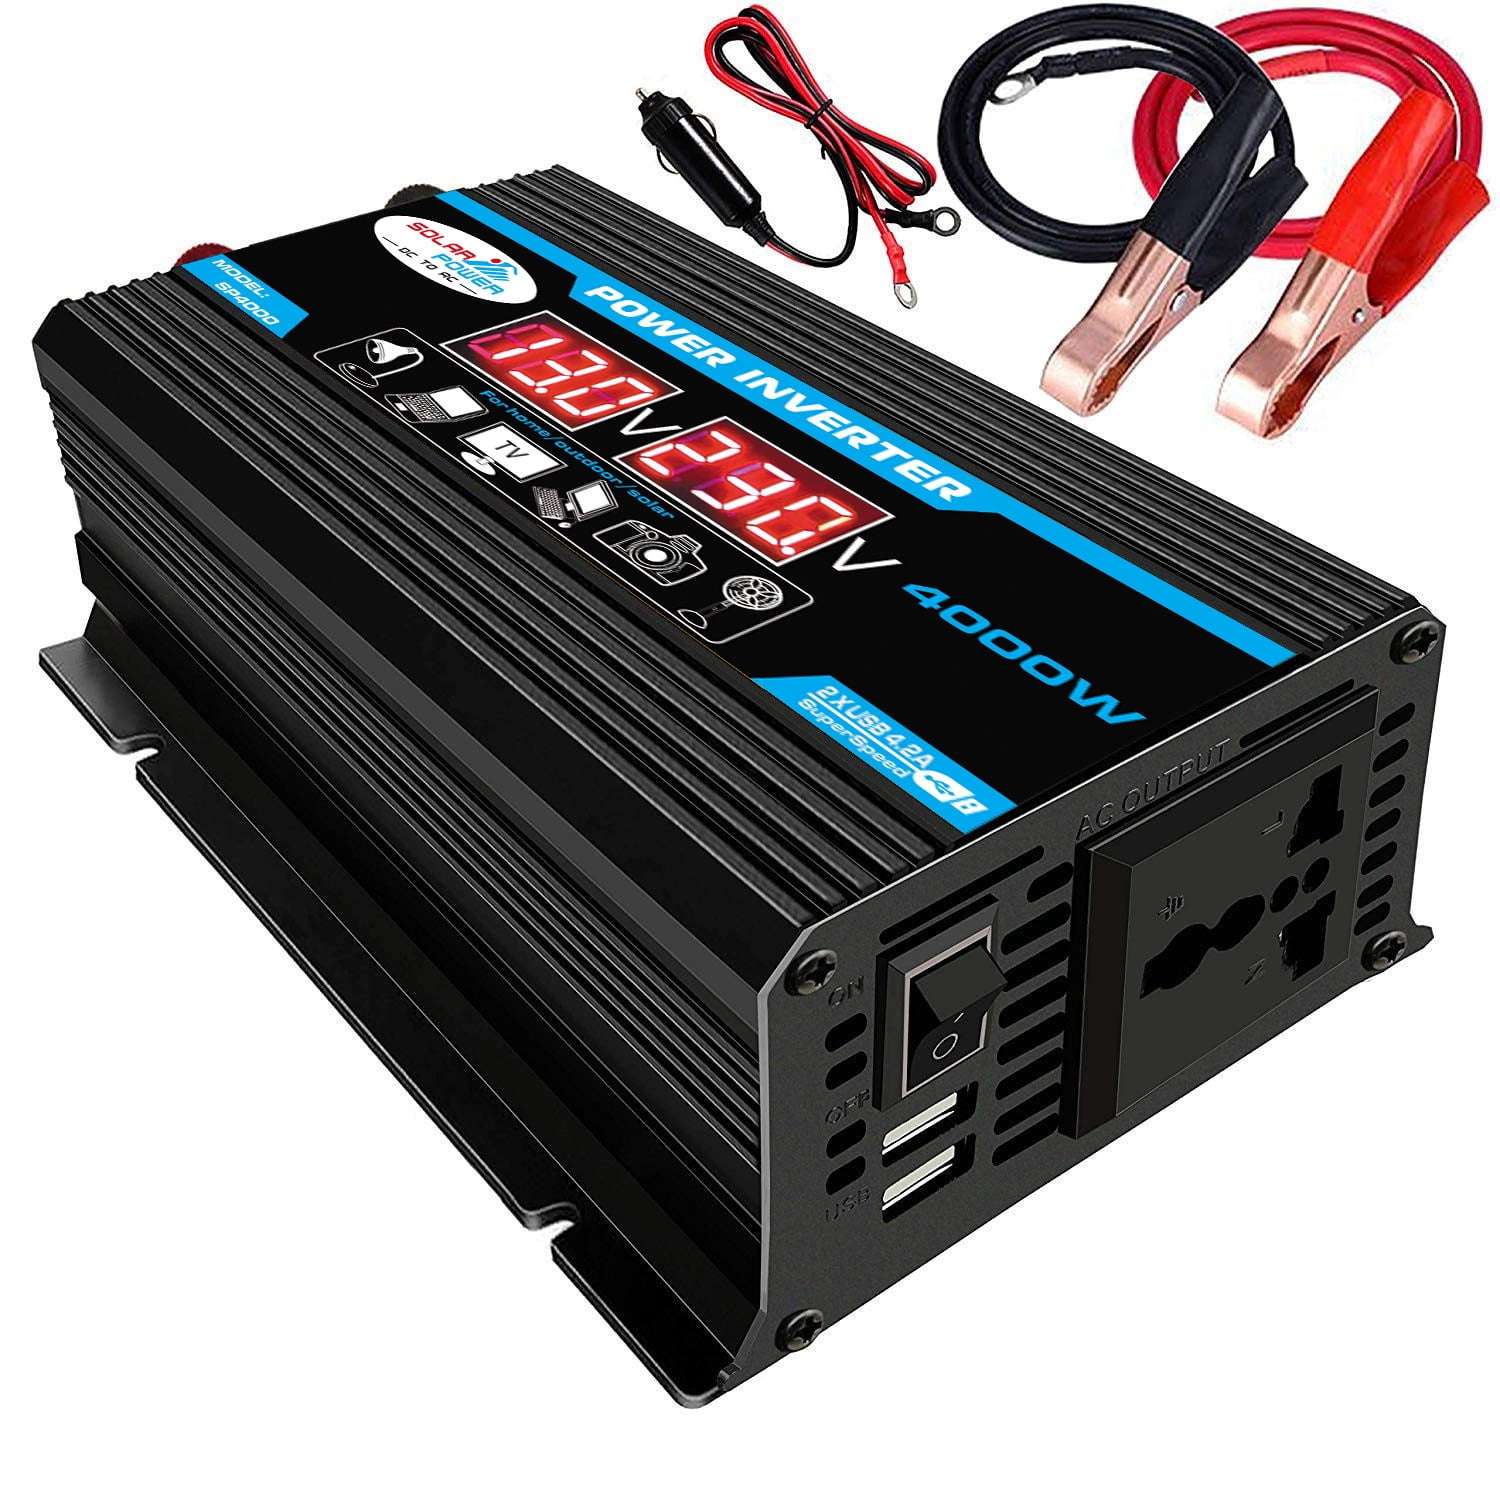 Red EBTOOLS 500W/1000W Inverter 12V DC to 110V Car Converter with 2 AC Outlets and 2.1A USB Ports for Laptop,Smartphone,Household Appliances in case Emergency Ampeak 1000W Power 